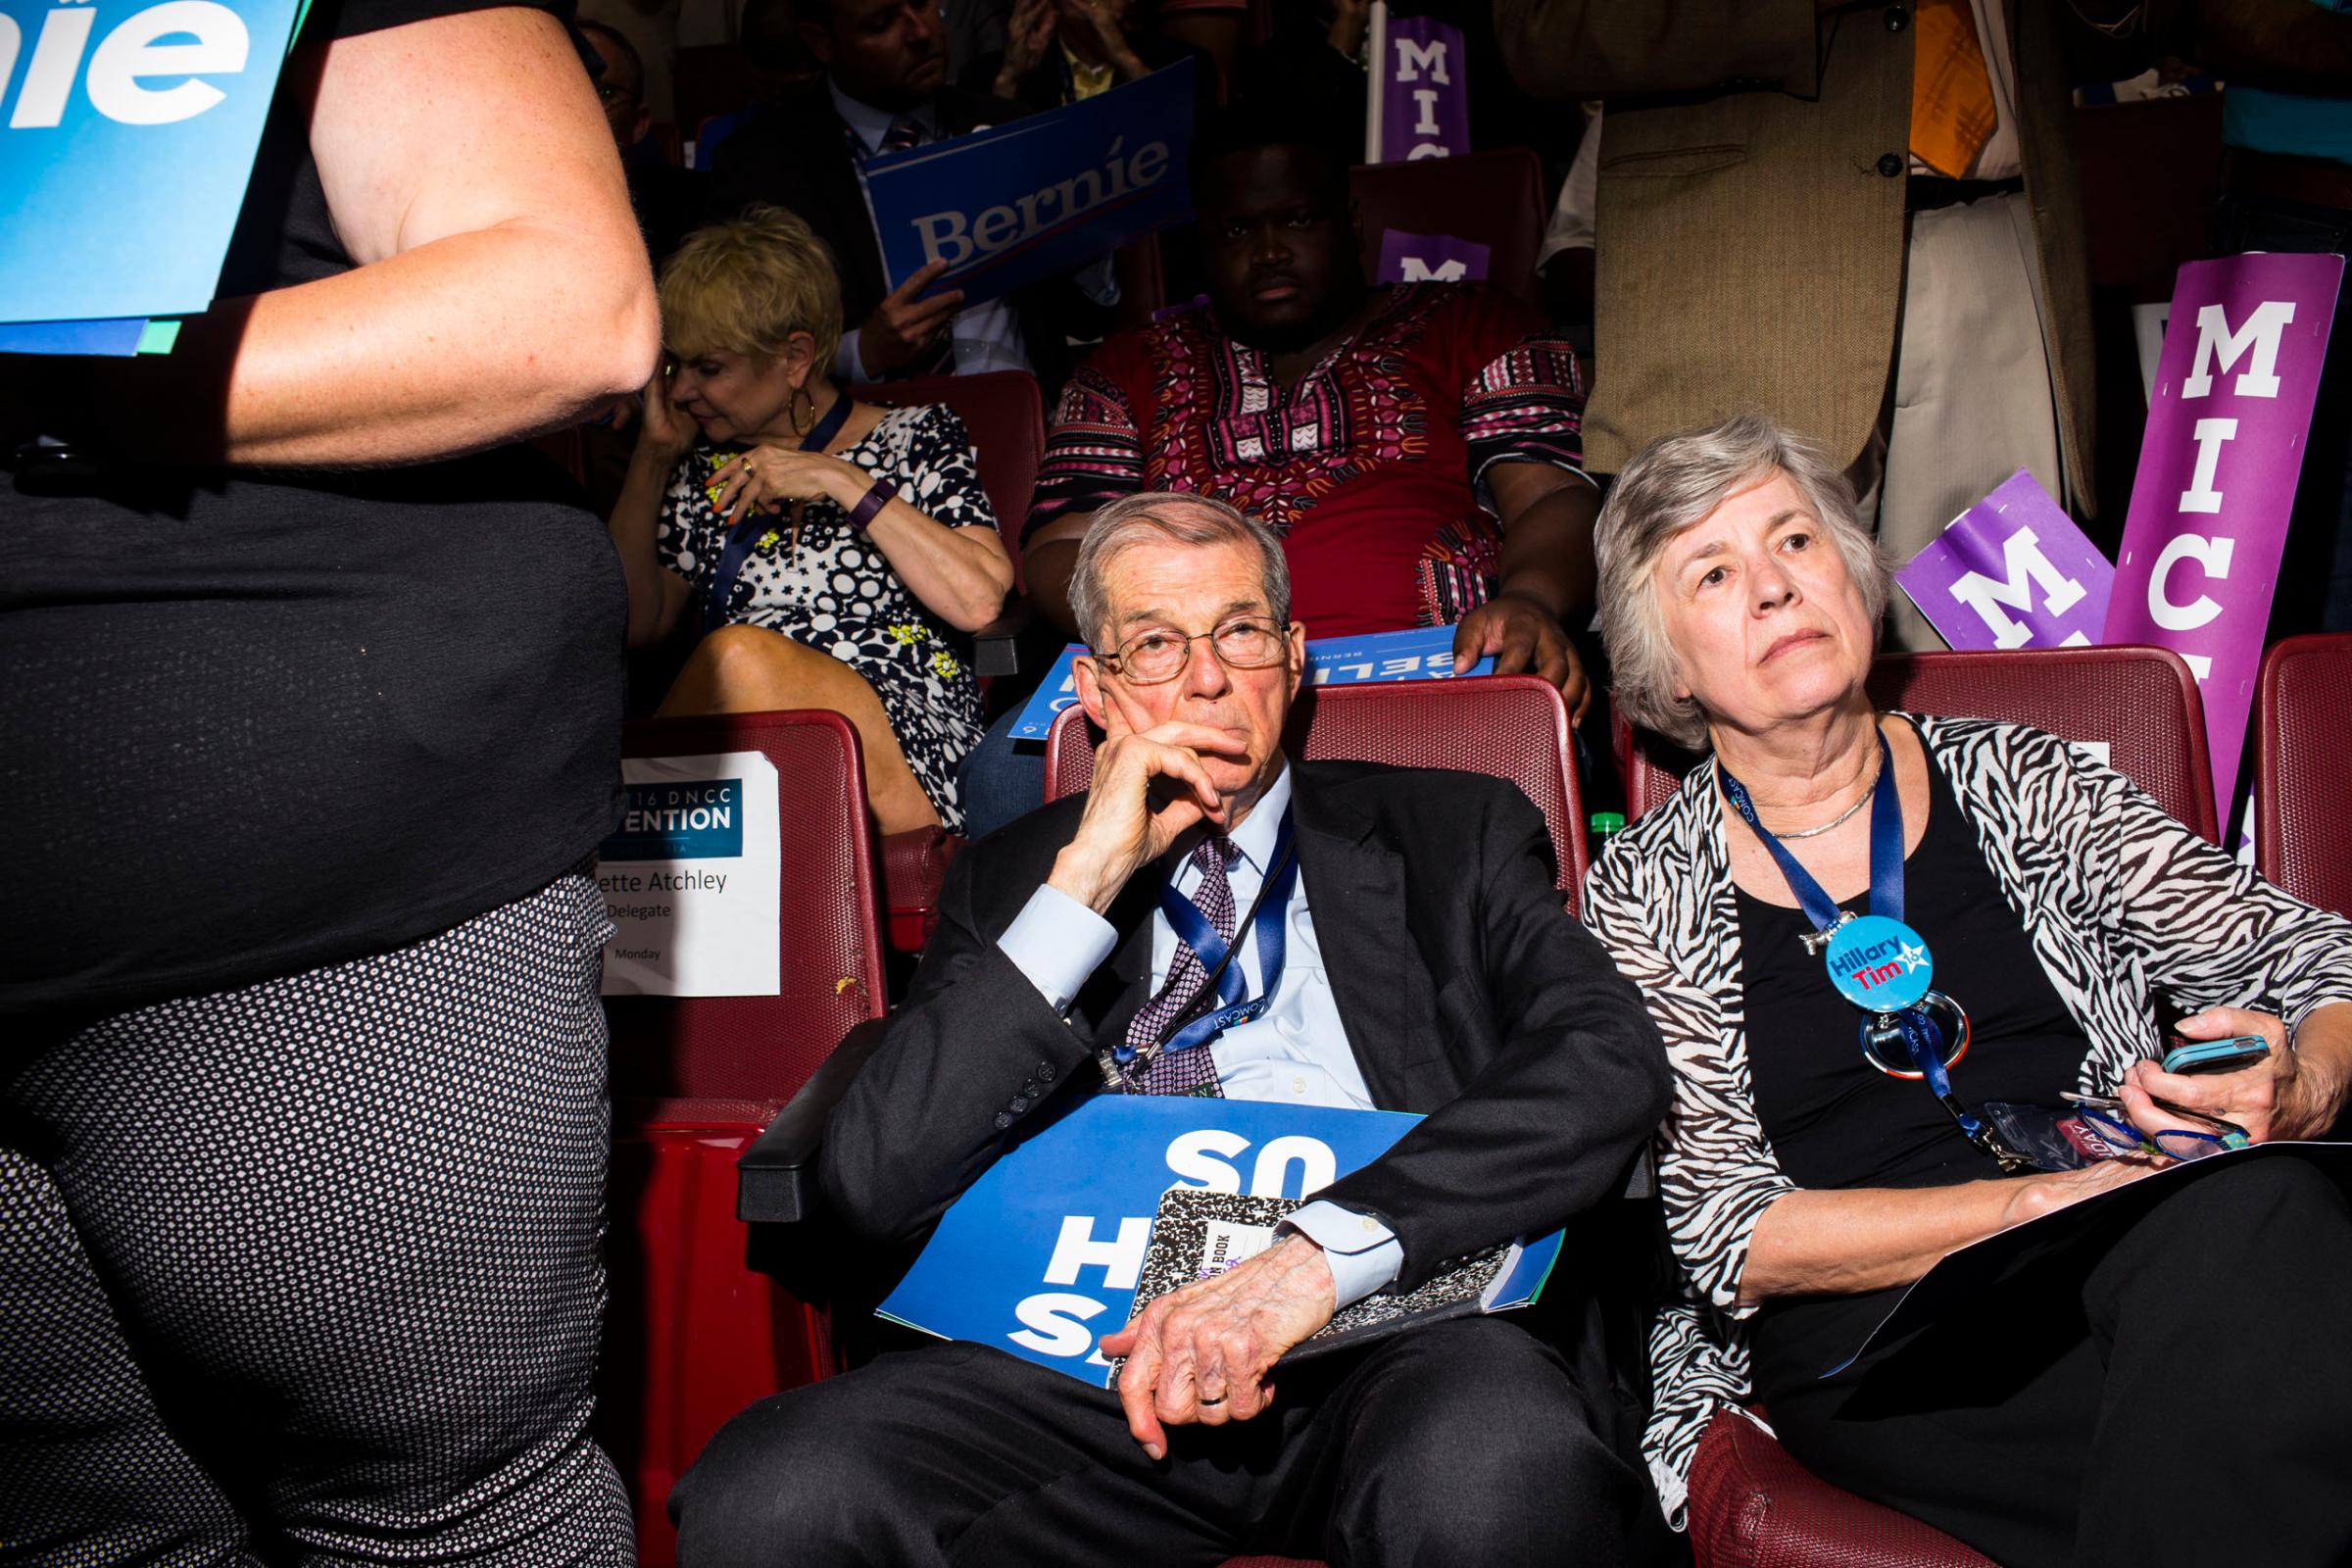 Scenes from the floor at the 2016 Democratic National Convention in Philadelphia on Monday, July 25, 2016.